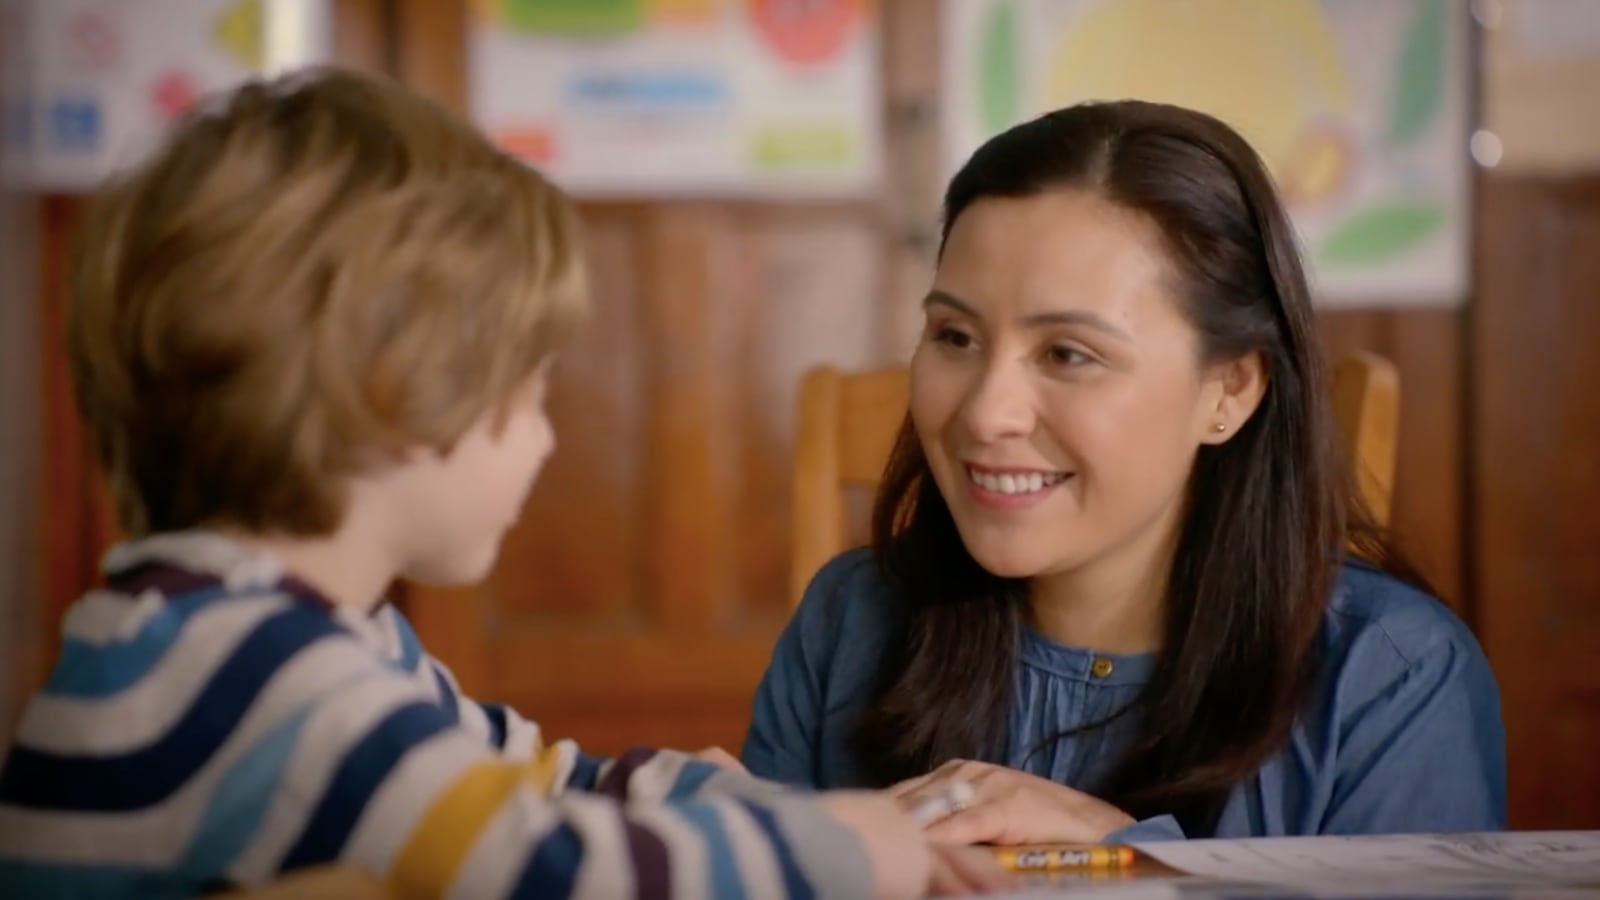 In a new ad released by The United Federation of Teachers, a teacher crouches at a student's desk and smiles.